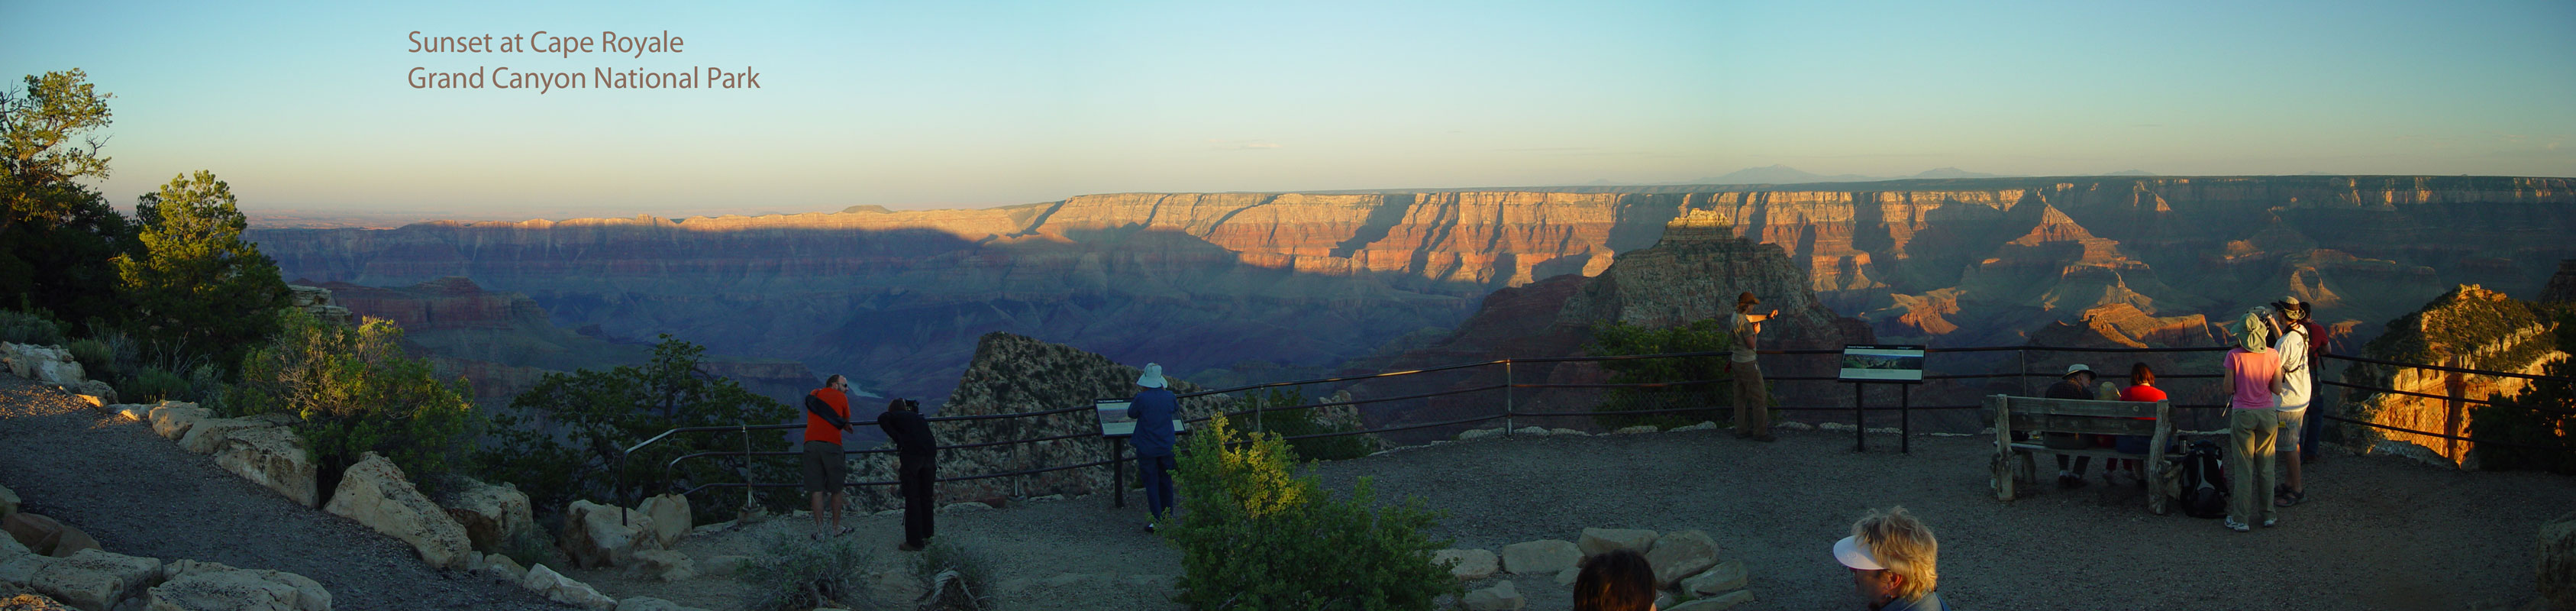 Sunset at Cape Royale Grand Canyon